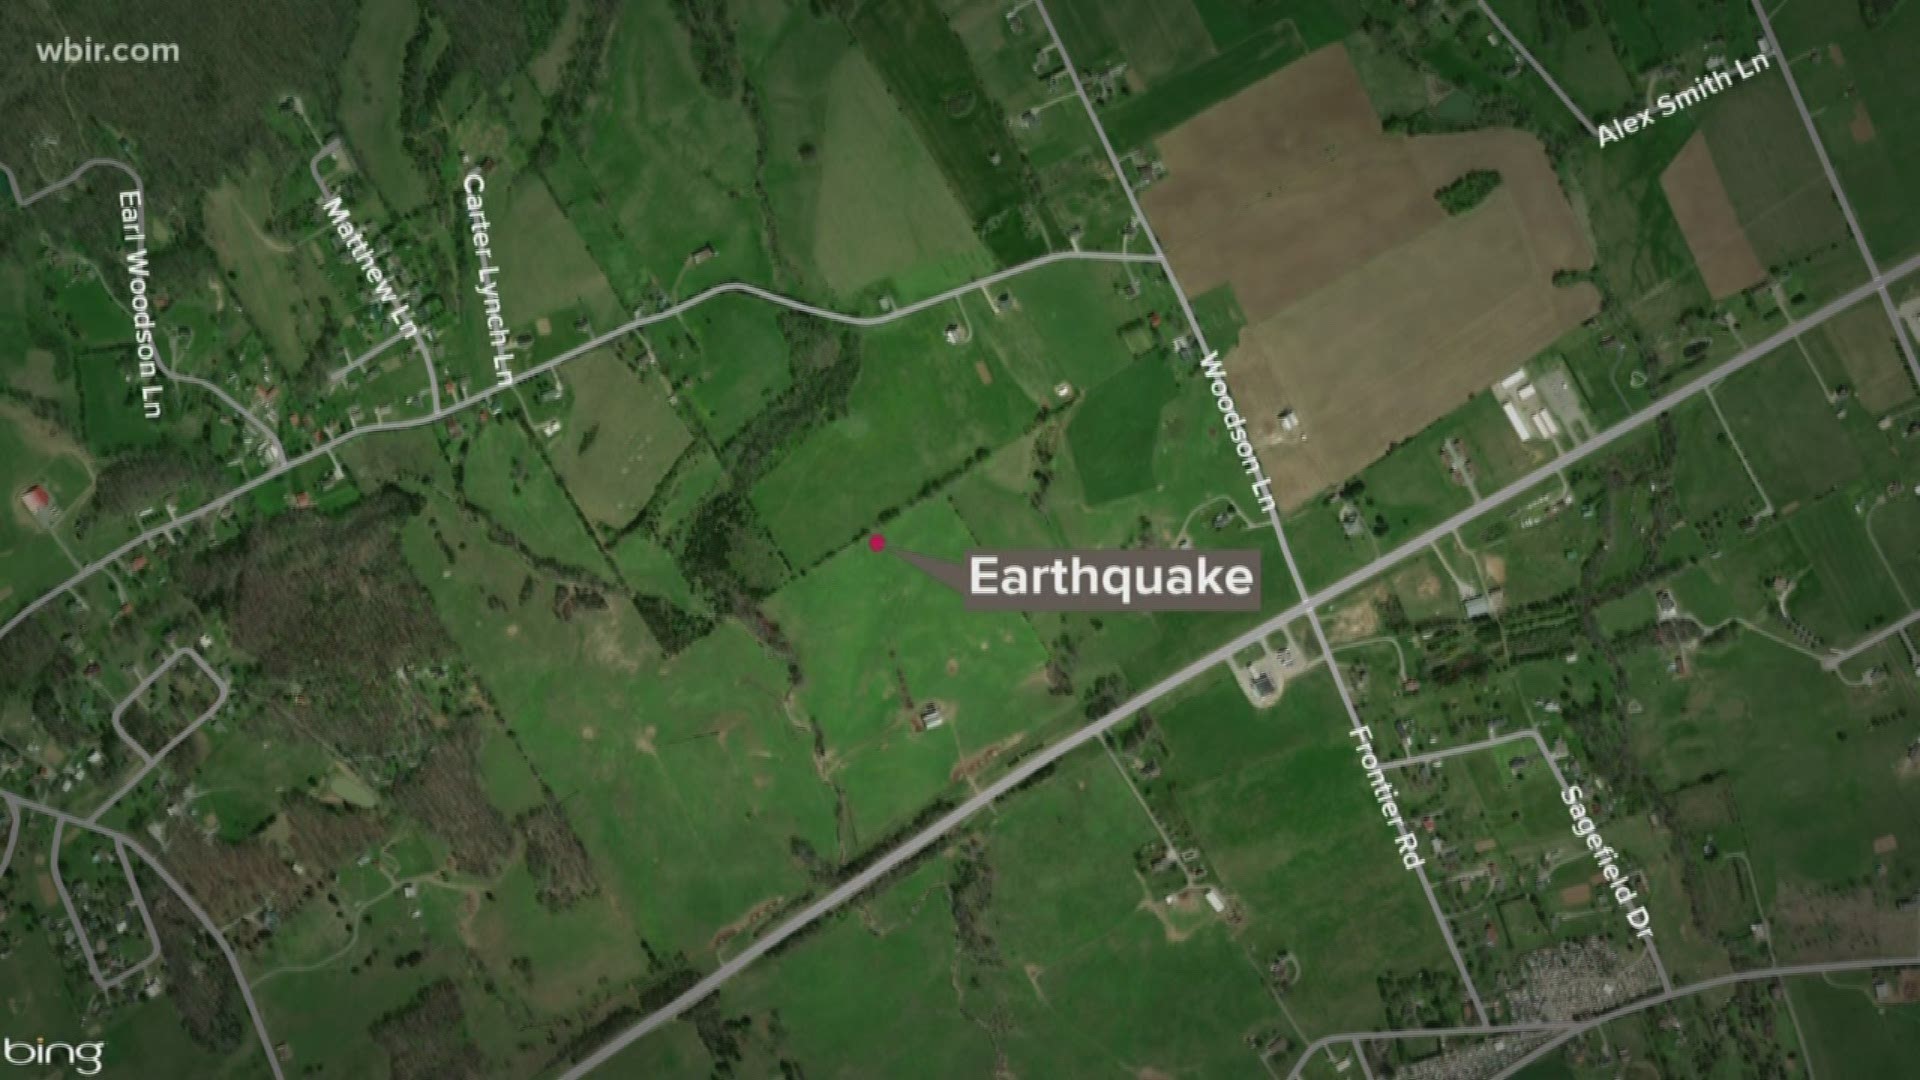 According to USGS, the Campbell County earthquake occurred at 5:19 a.m. Sunday.p